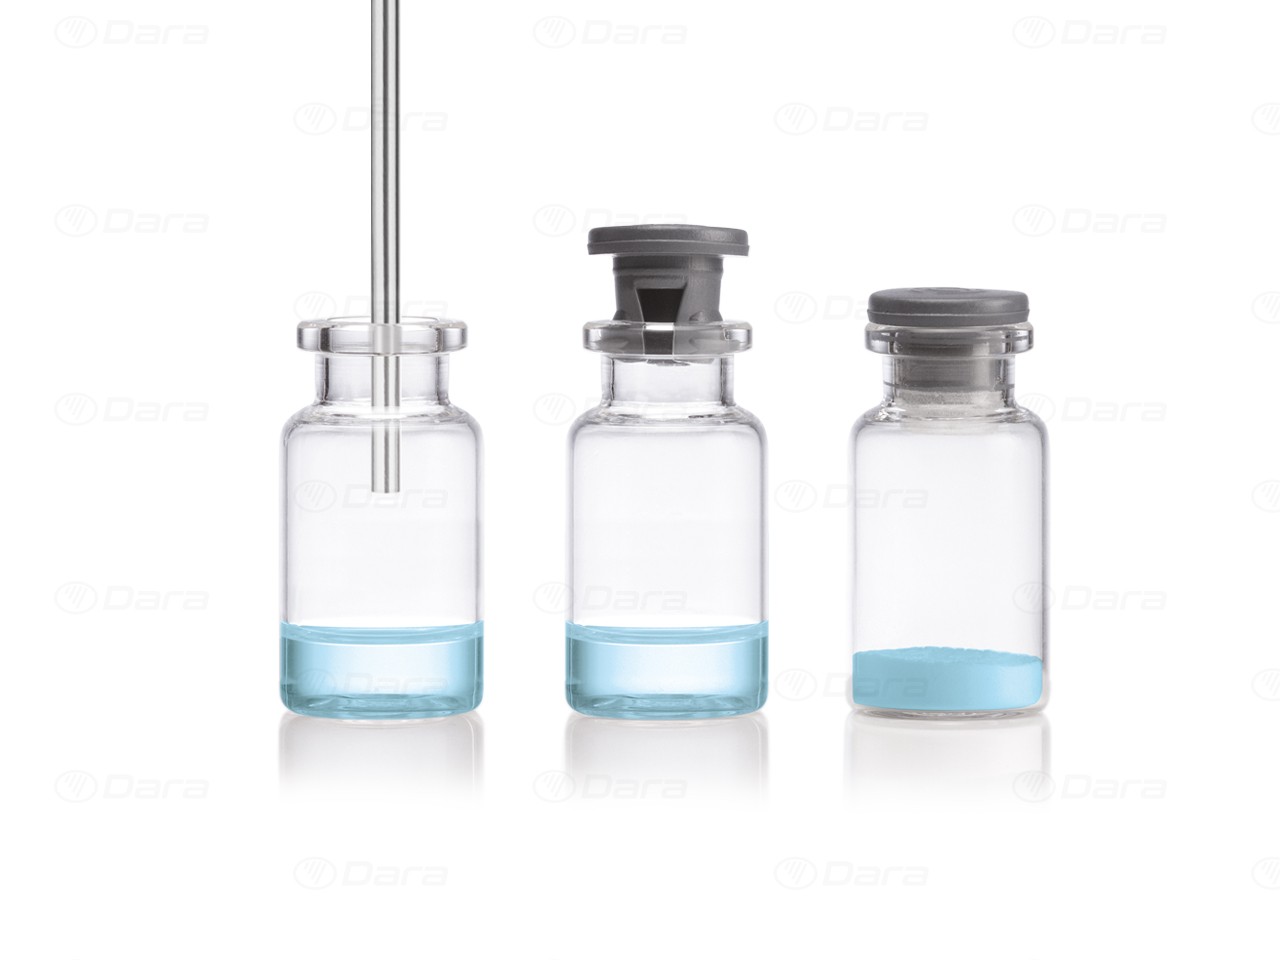 Complete lines for processing of vials